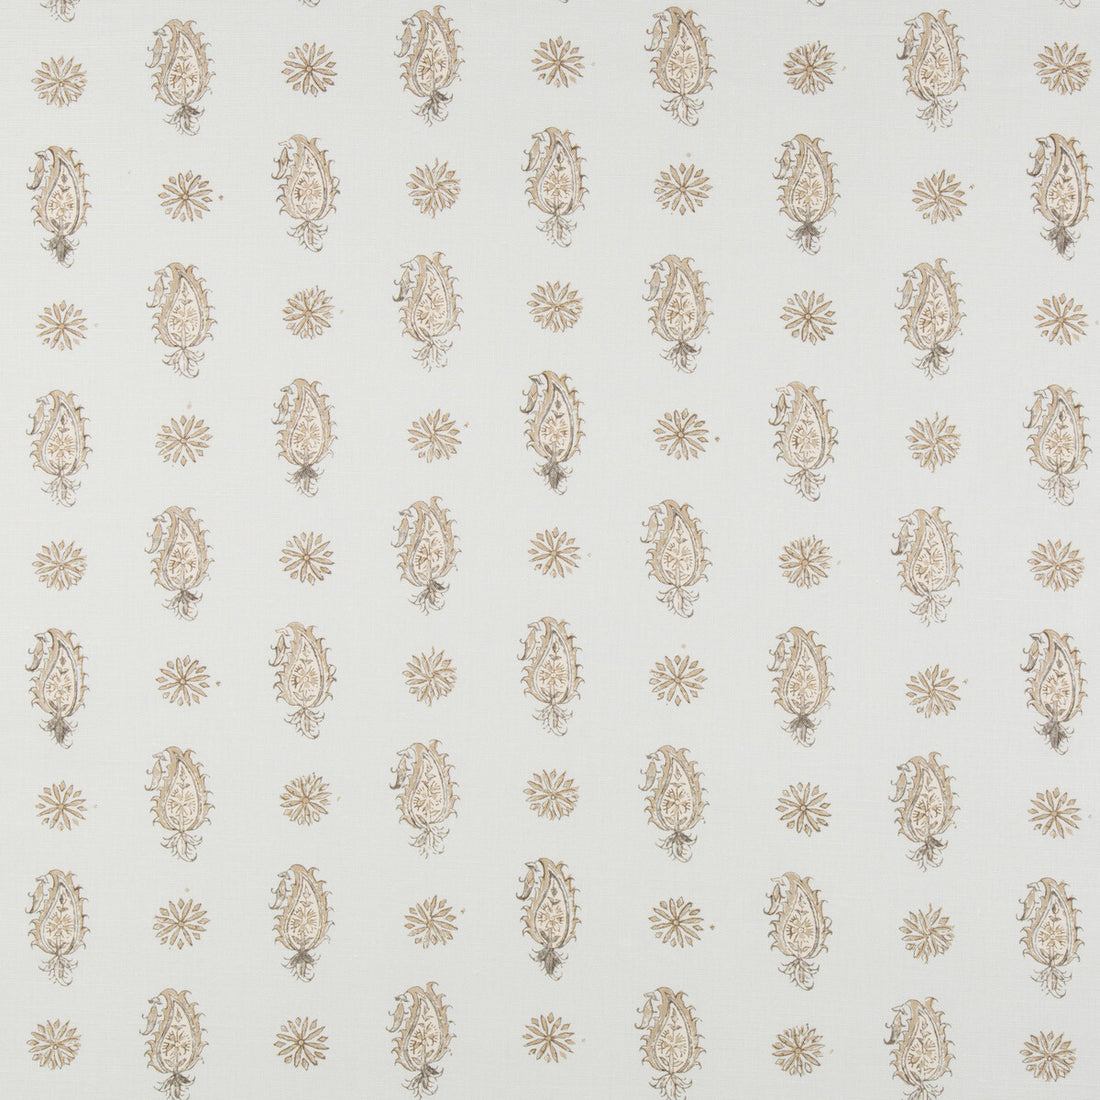 Onam Paisley fabric in spa/beige color - pattern 8016100.13.0 - by Brunschwig &amp; Fils